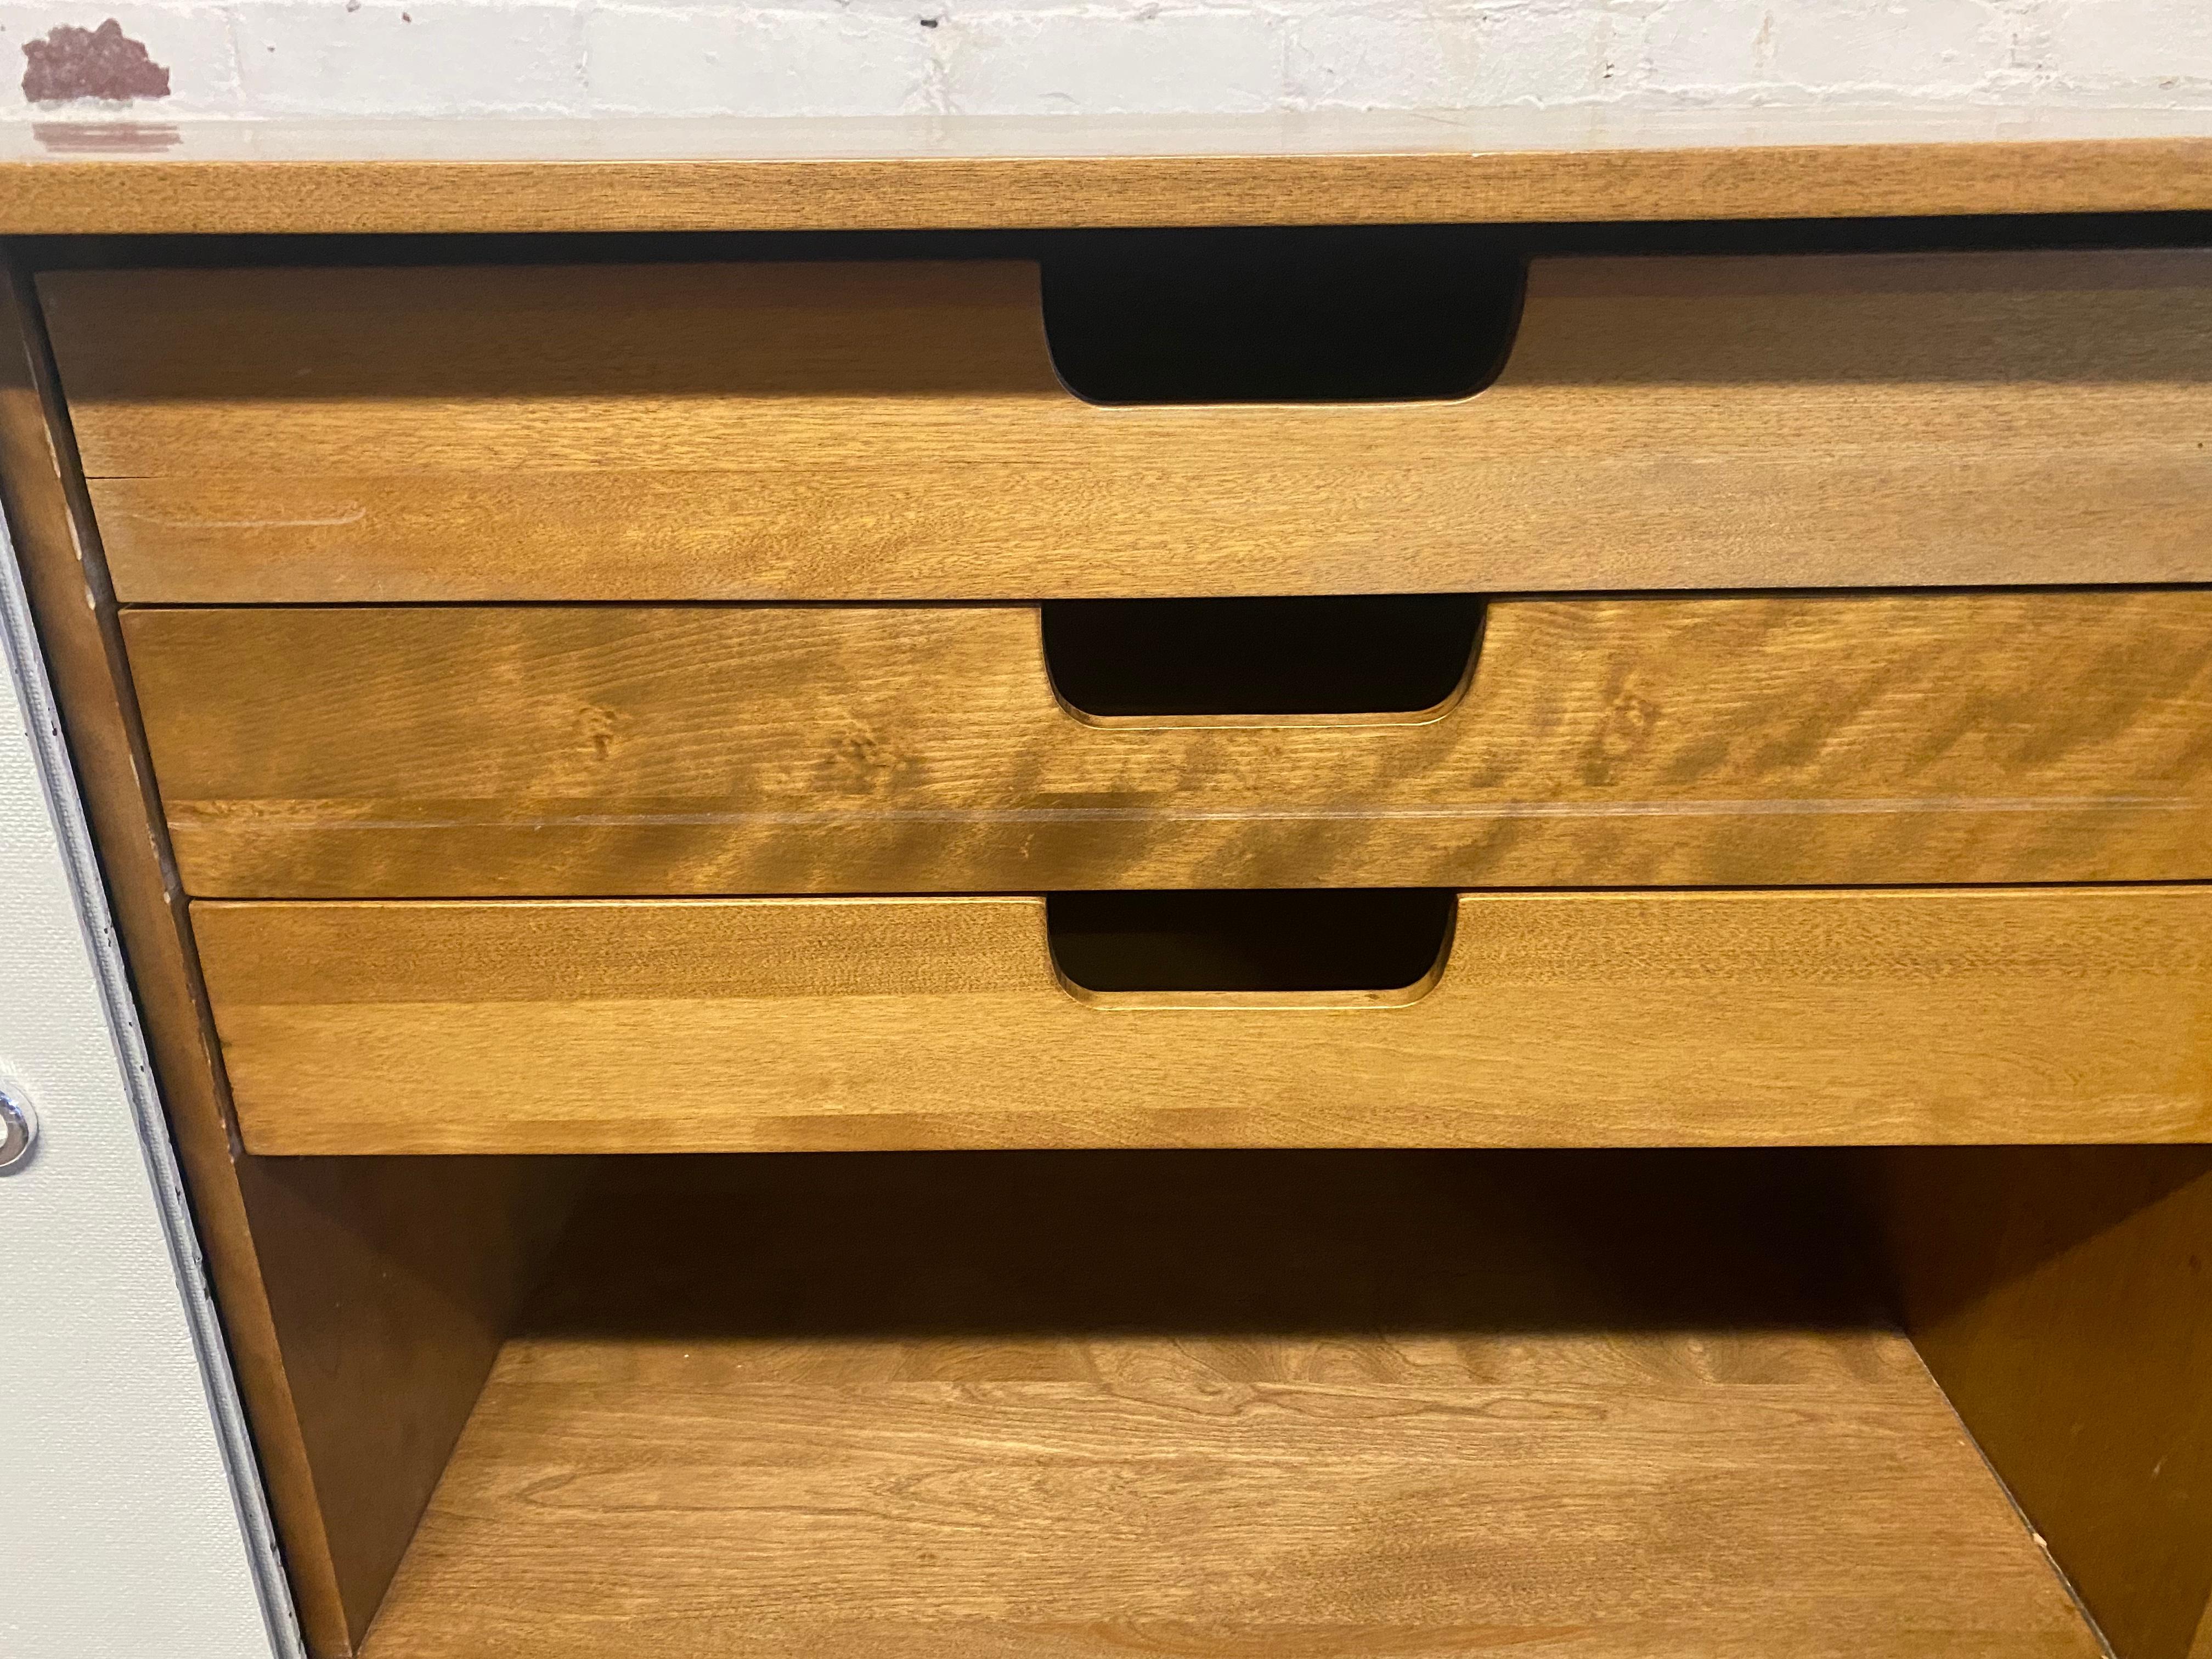 Paul McCobb Planner Group Sliding Door Credenza with Drawers, Classic Modernist In Good Condition For Sale In Buffalo, NY